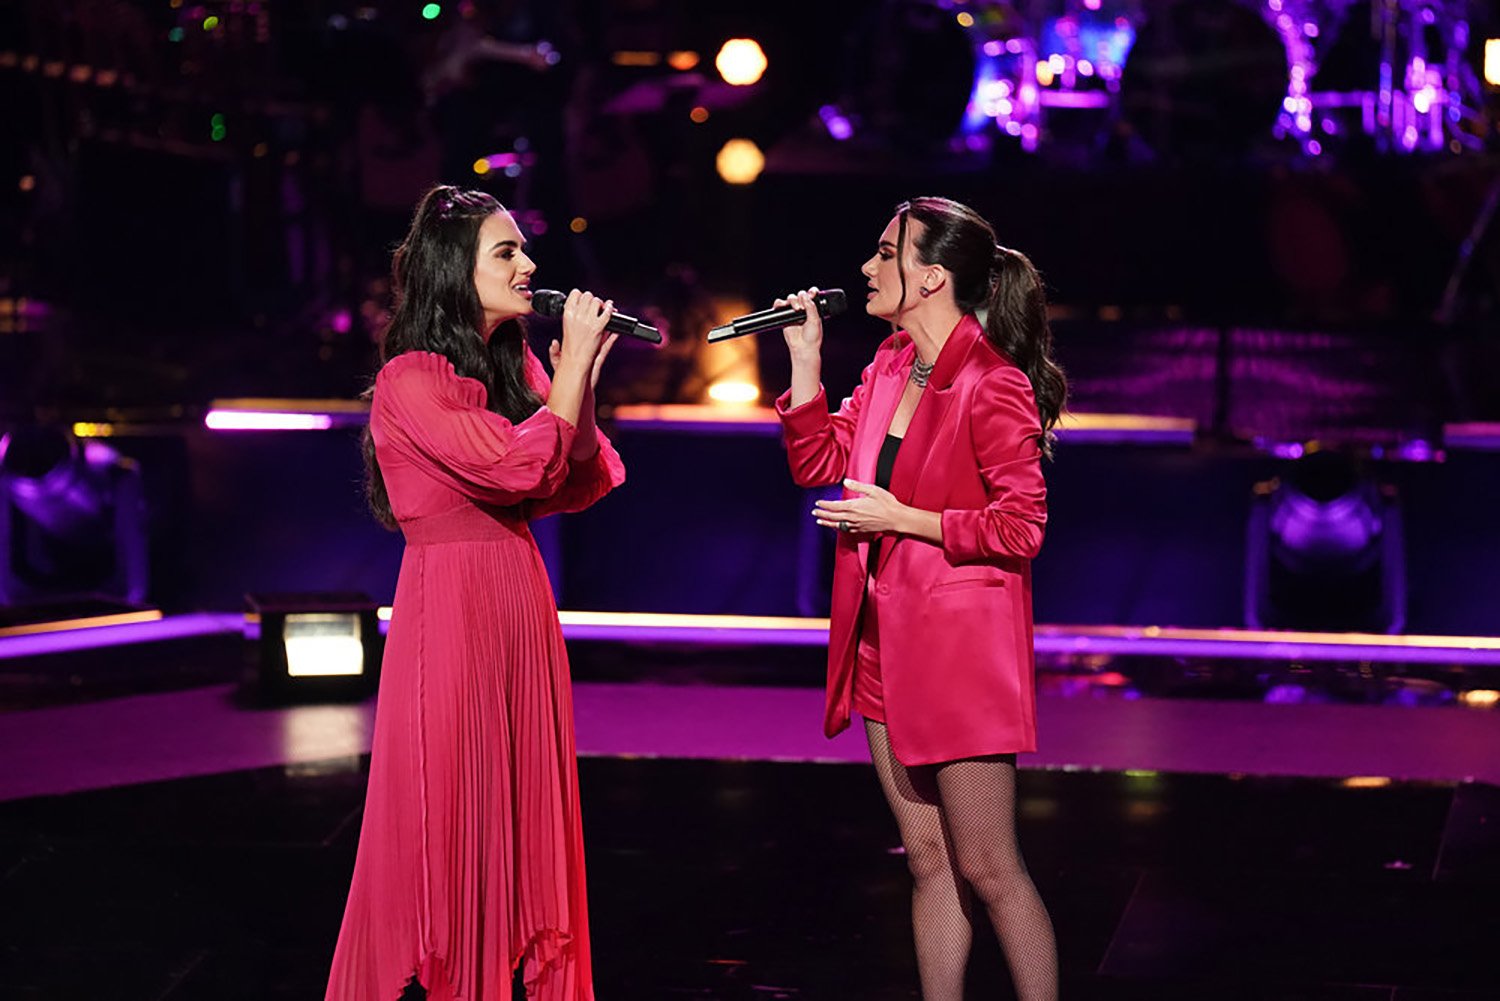 The Marilynds perform on The Voice Season 22 Episode 15.